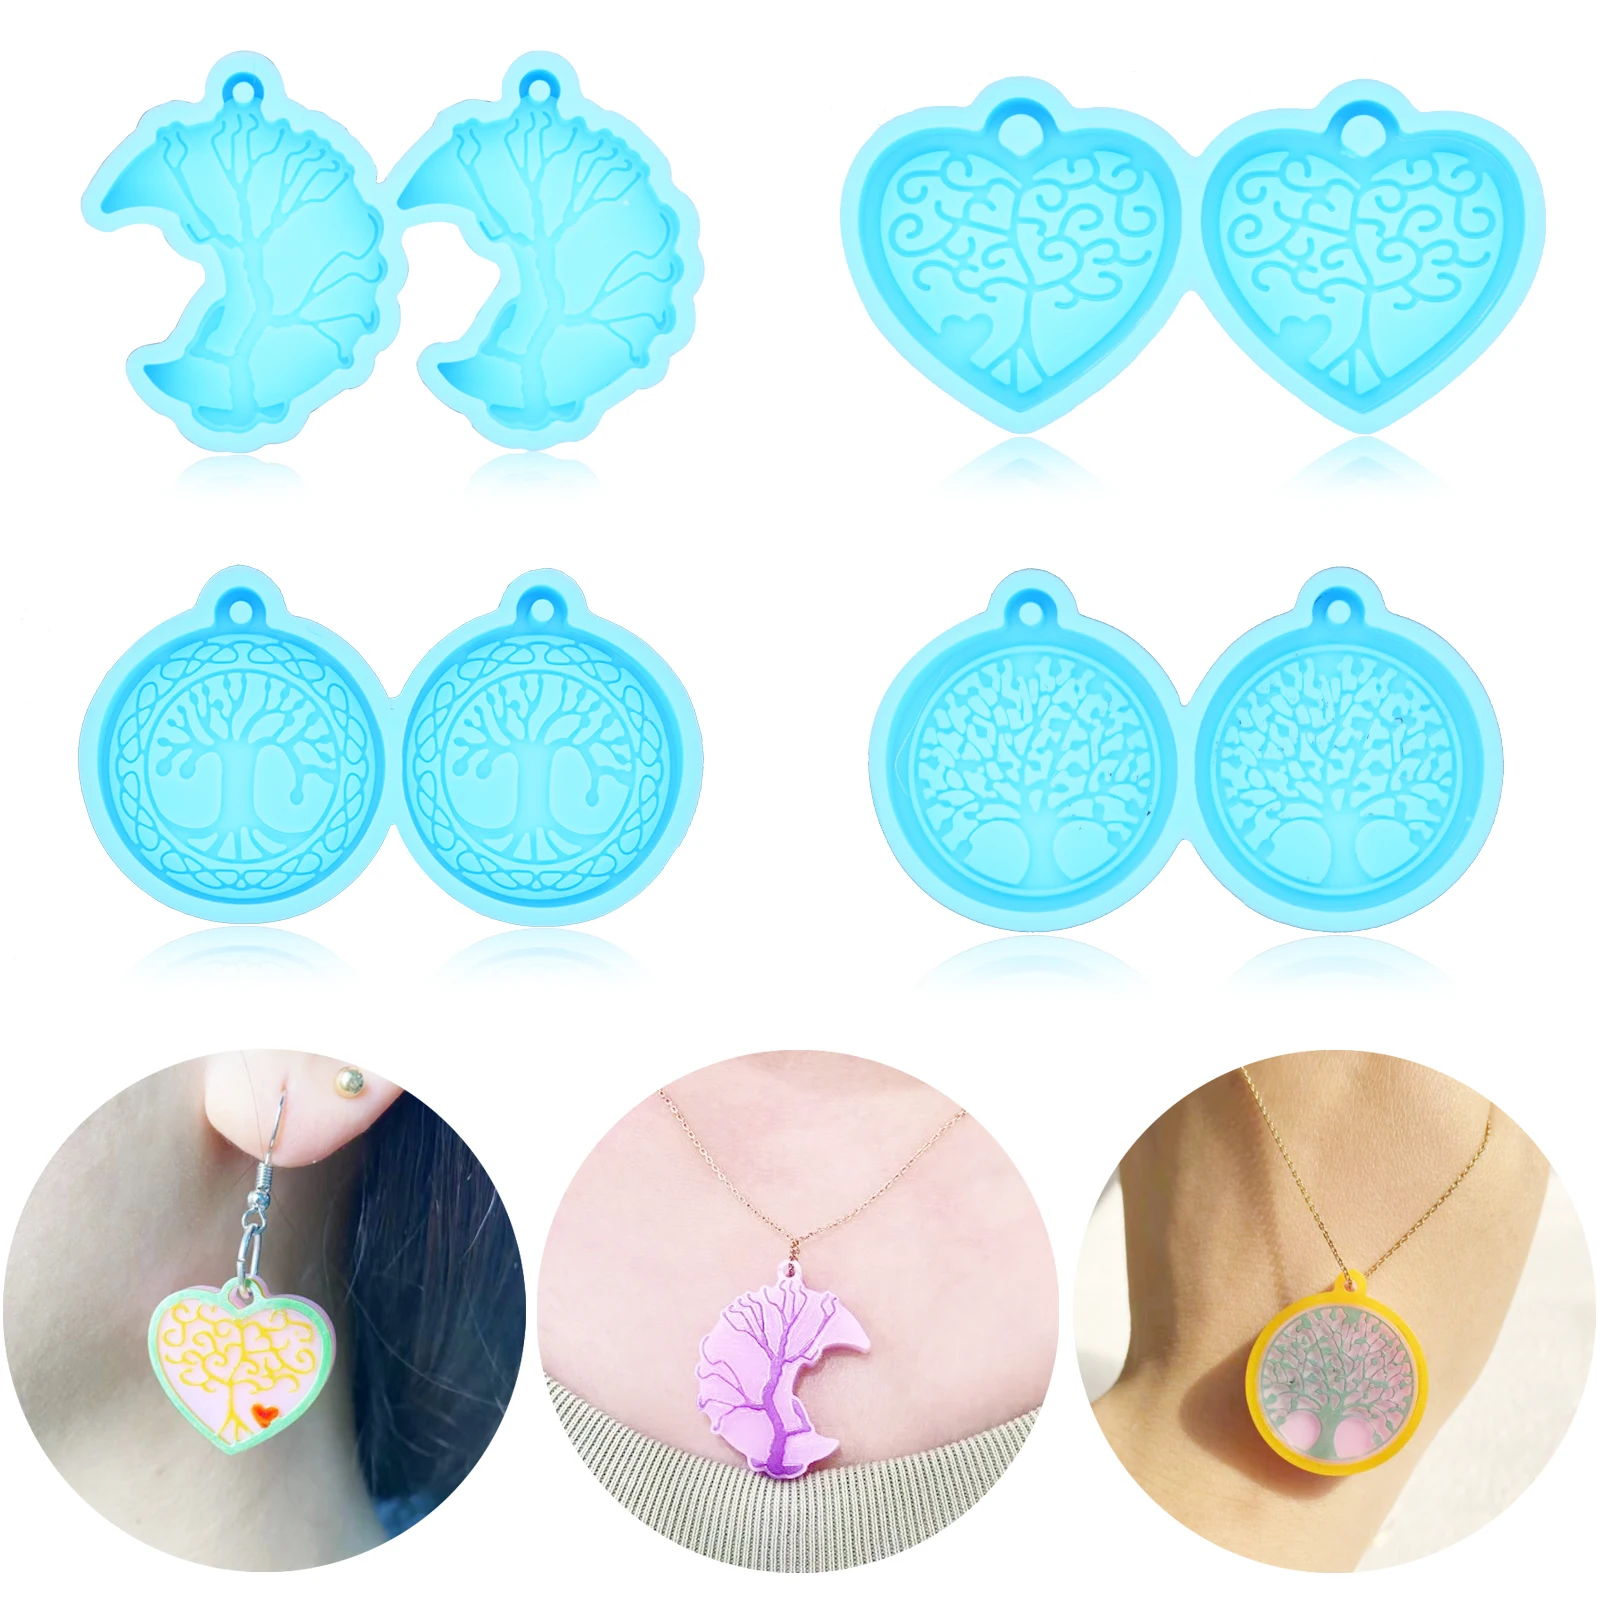 New Round Heart Earrings UV Resin Mold Tree of Life Necklace Keychain Pendant Epoxy Silicone Mold DIY Jewerly Making Supplies heart laser holographic silicone mould epoxy resin mobile bracket mold for diy handmade phone holder making supplies accessories